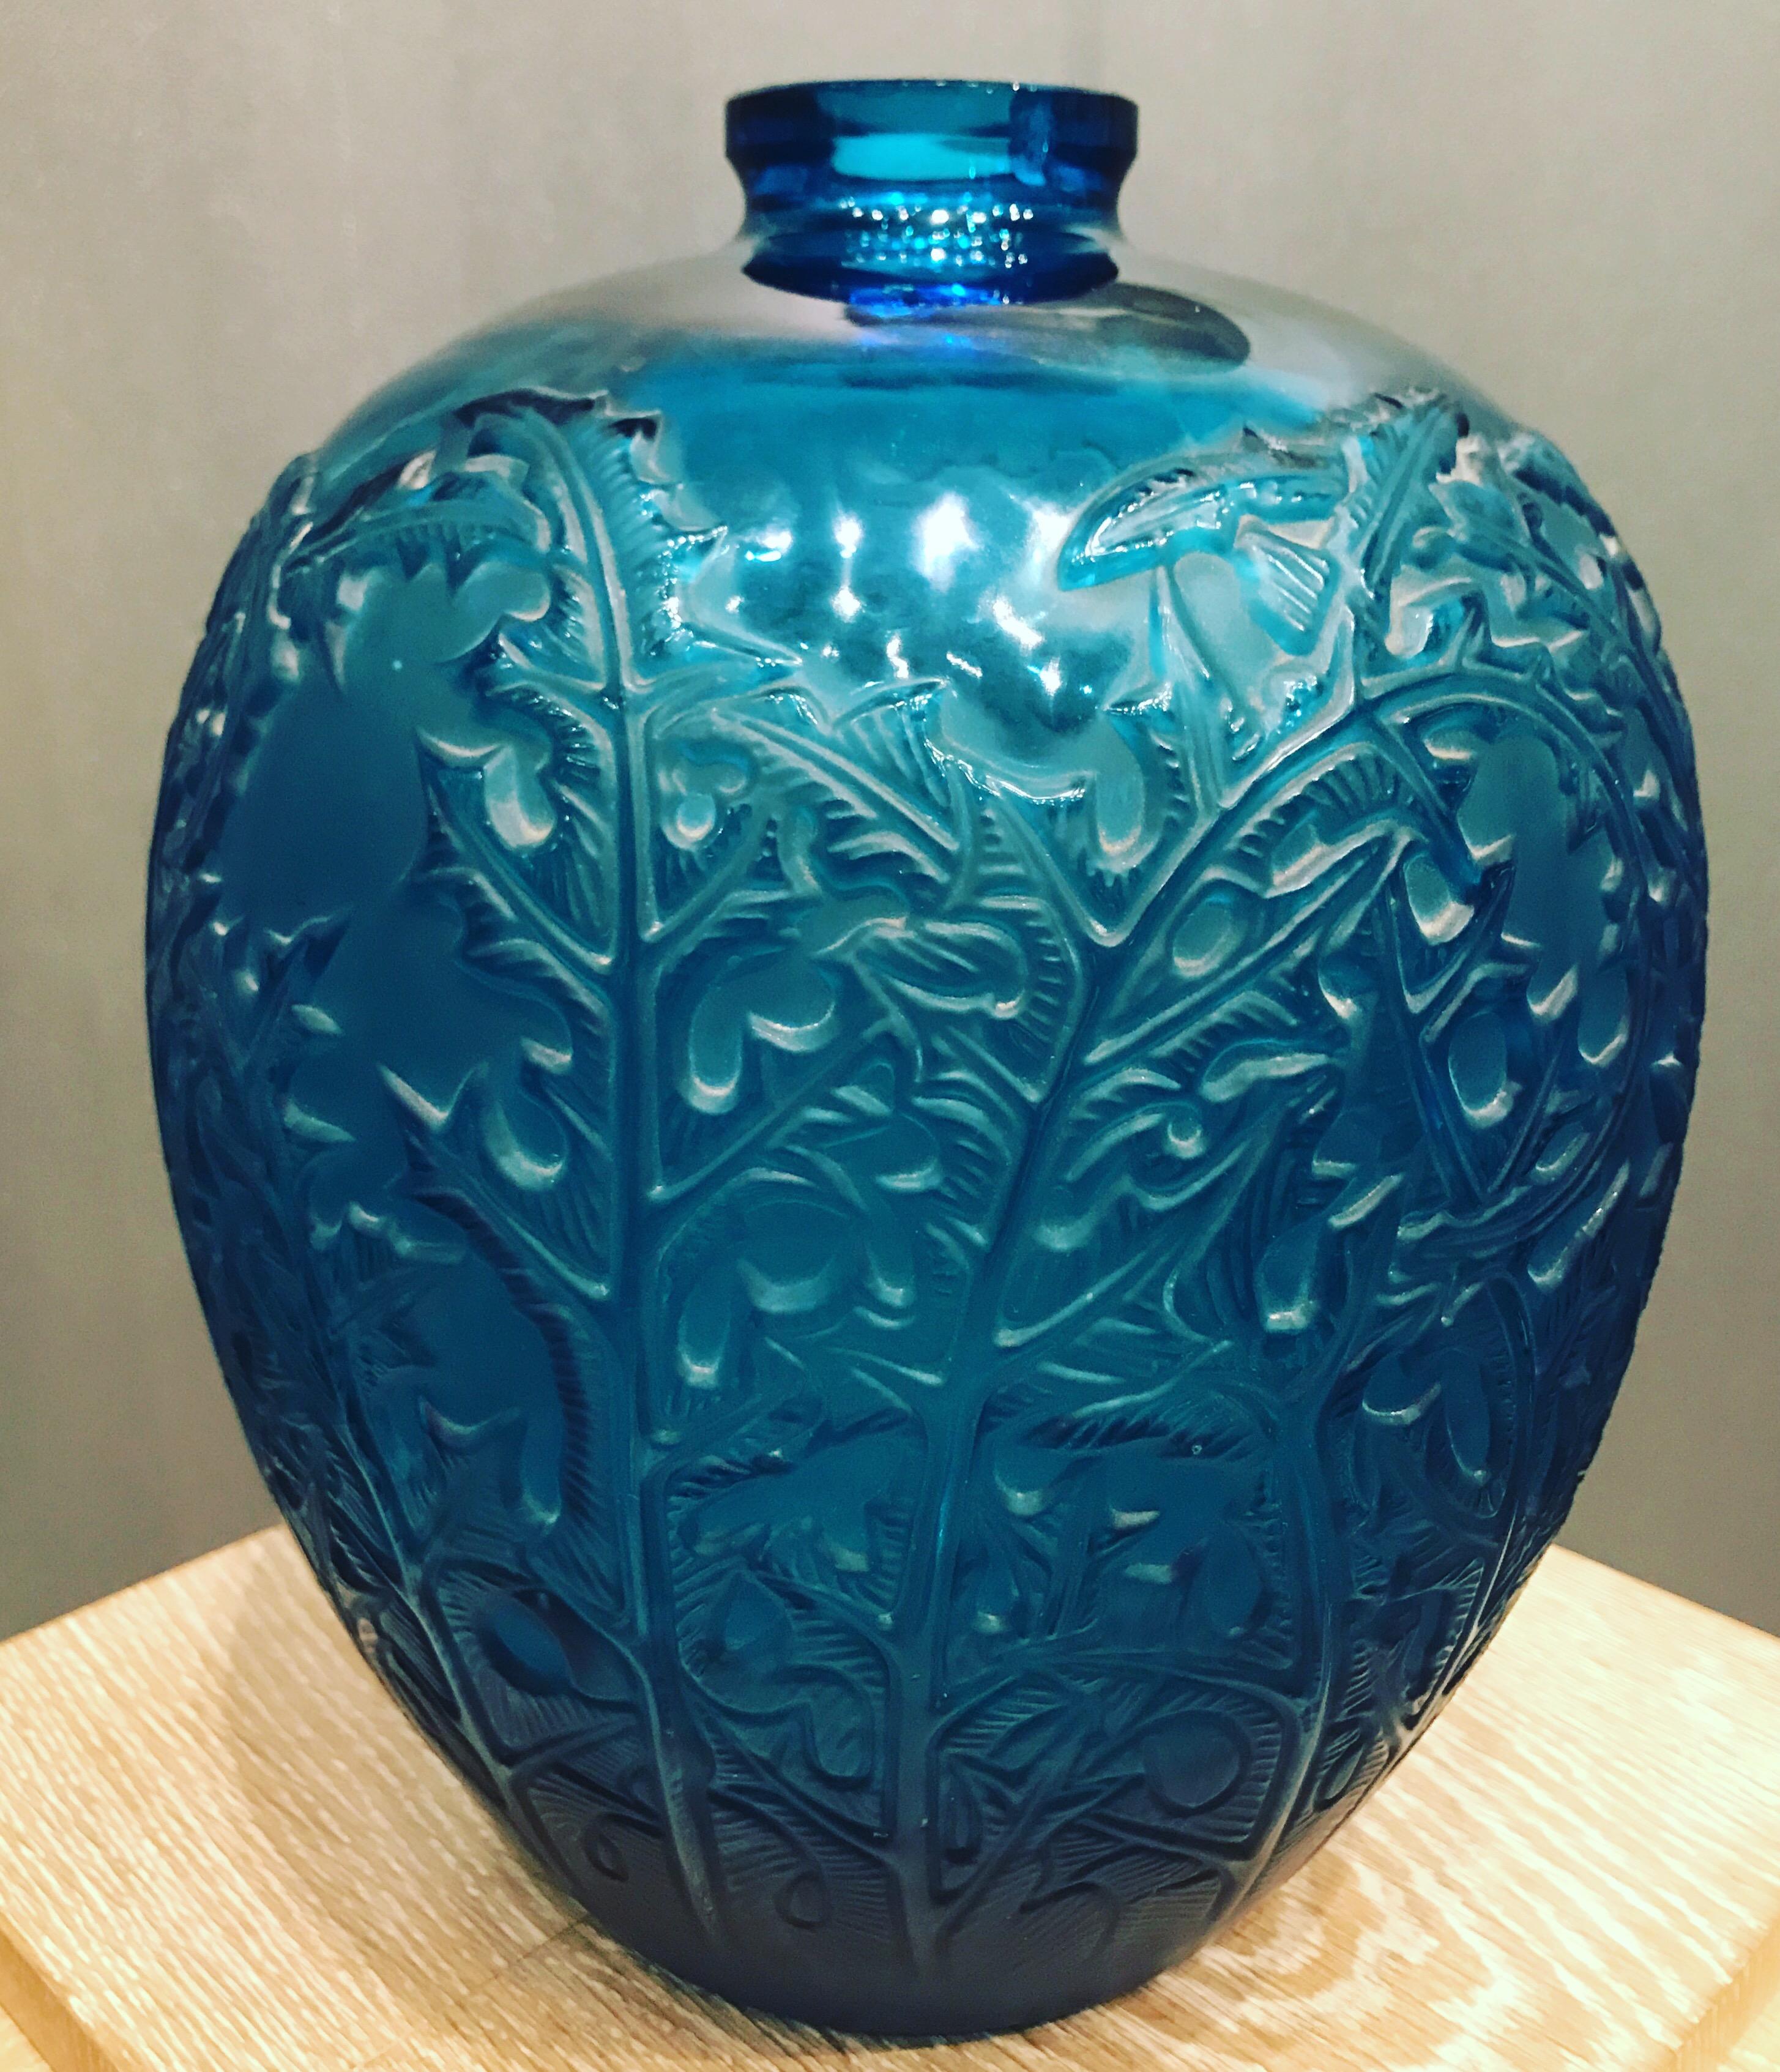 French 1921 Rene Lalique Acanthes Vase in Electric Blue Glass